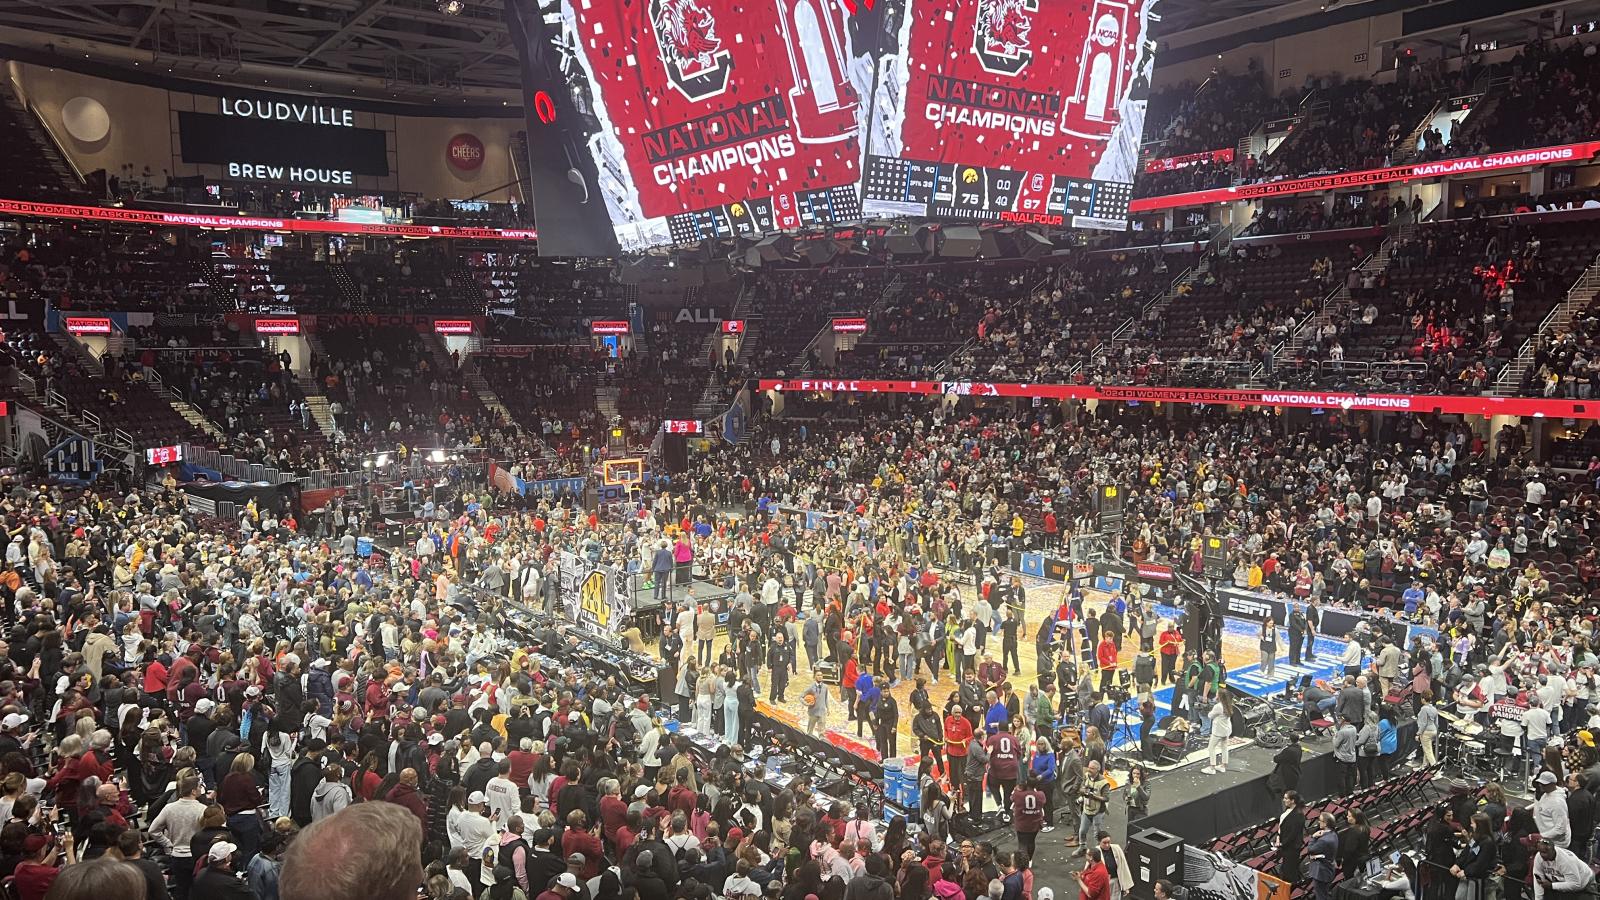 Coiurt and confetti falling from ceiling at women's final four